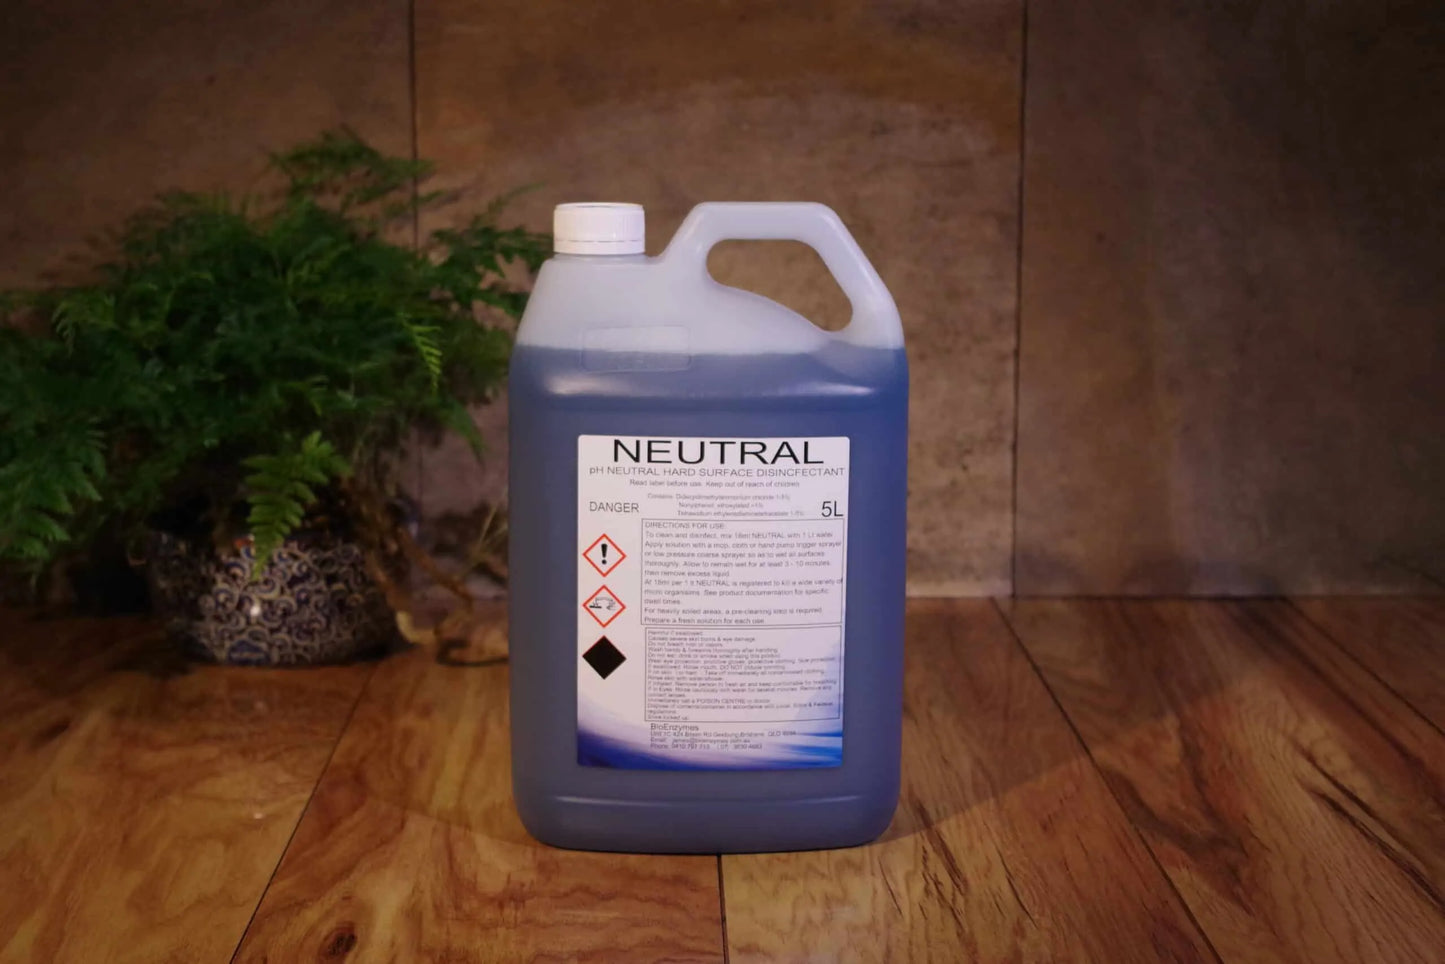 BIOENZYMES pH Neutral Disinfectant for Hard Surfaces